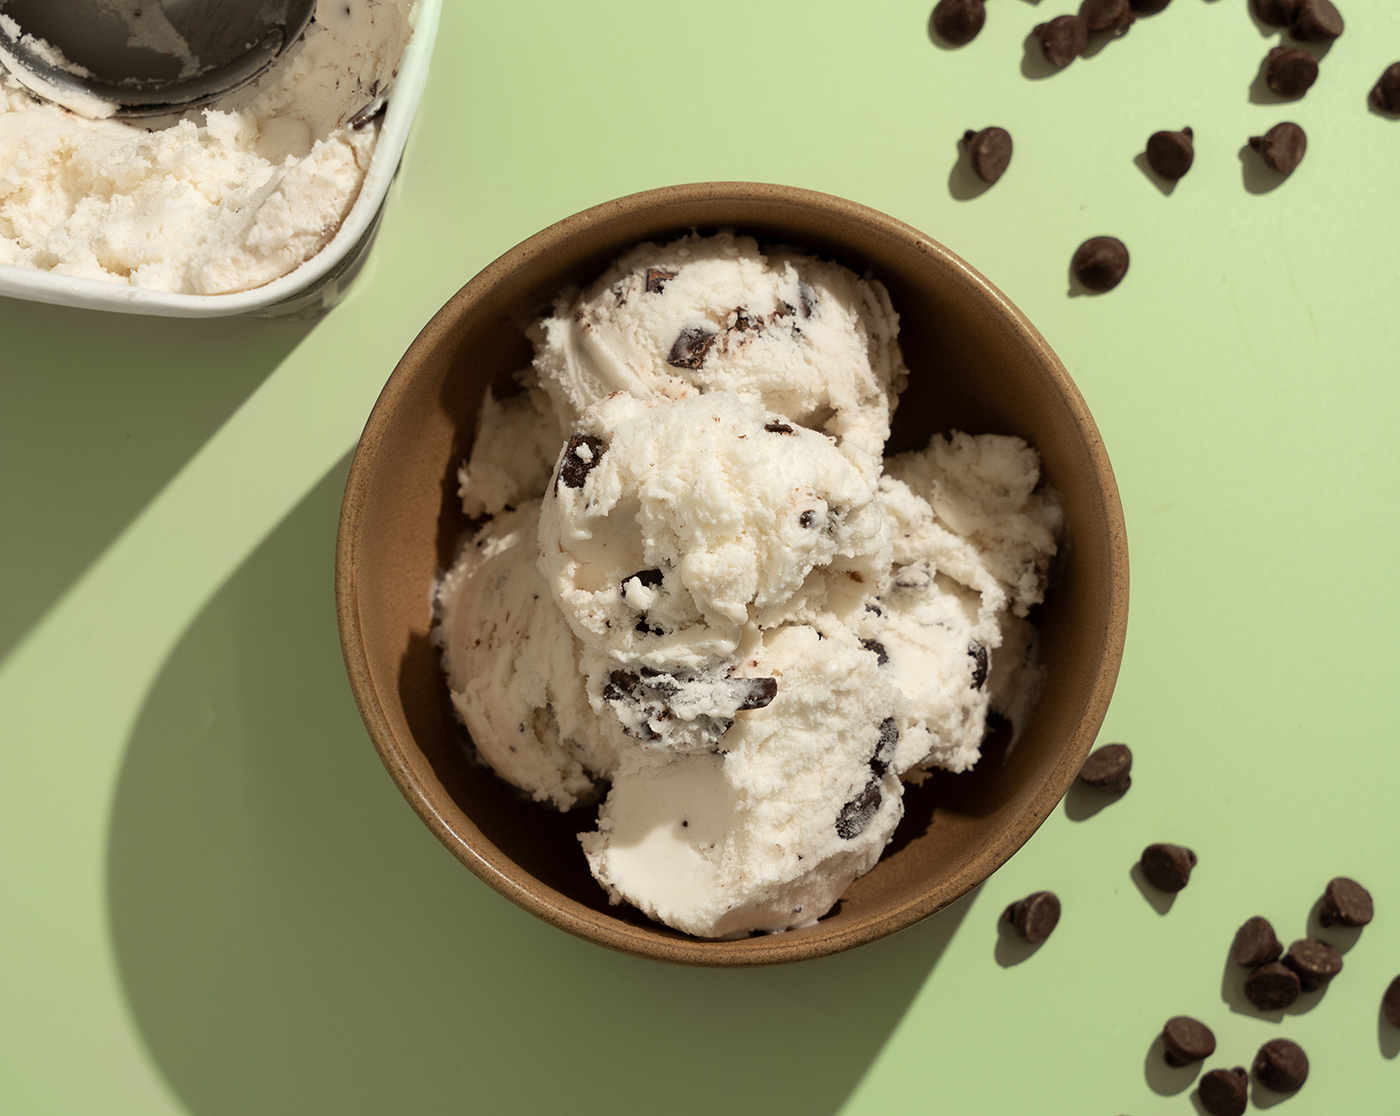 Mint Chocolate Chip Ice Cream Recipe with High Protein